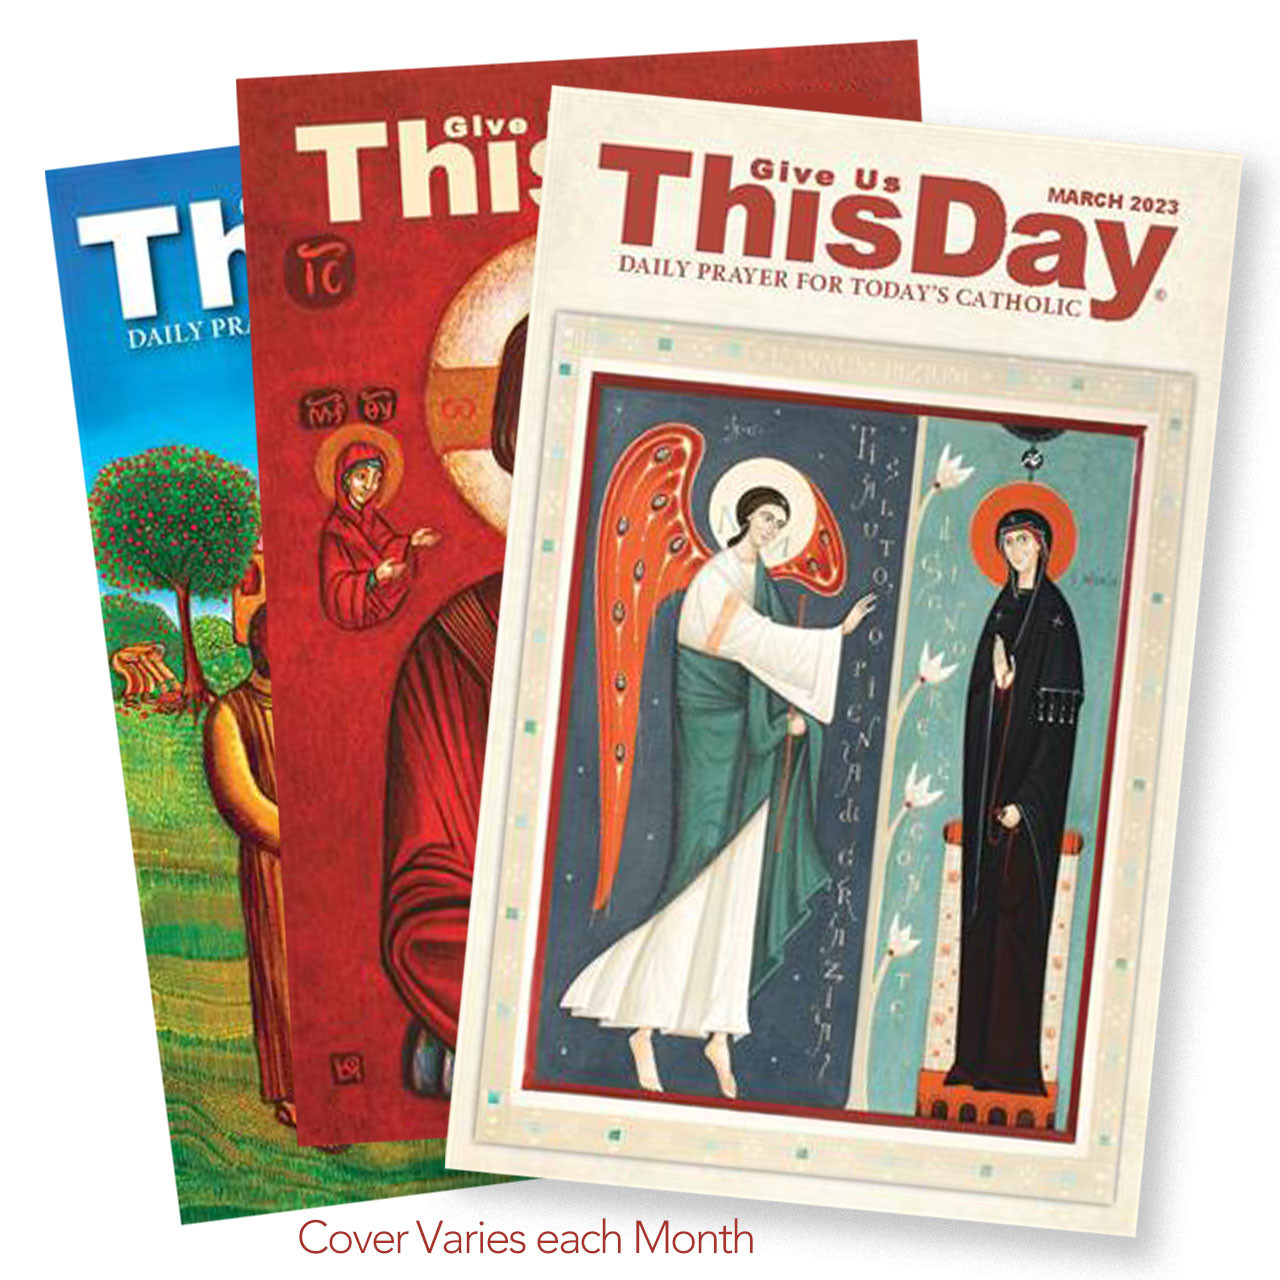 Give Us This Day Monthly Catholic Booklet - Cover varies each month